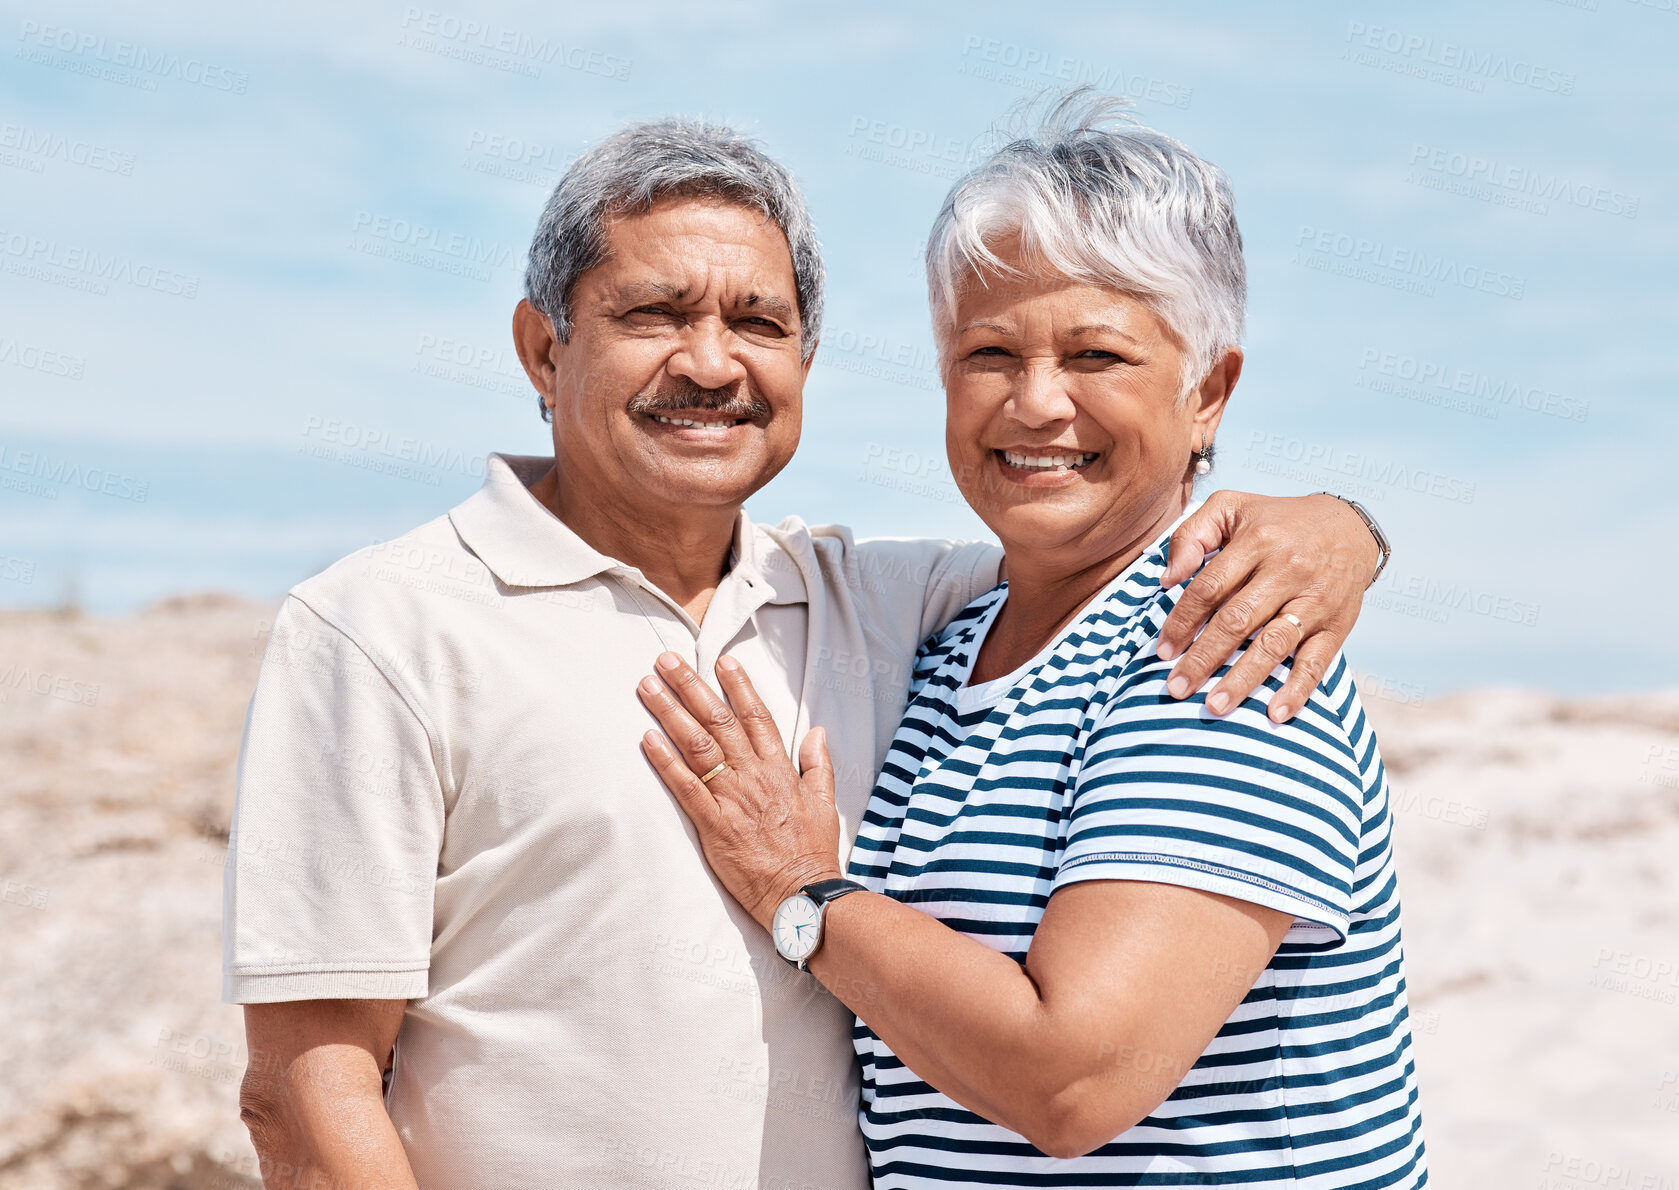 Buy stock photo Shot of a senior couple standing together on the beach